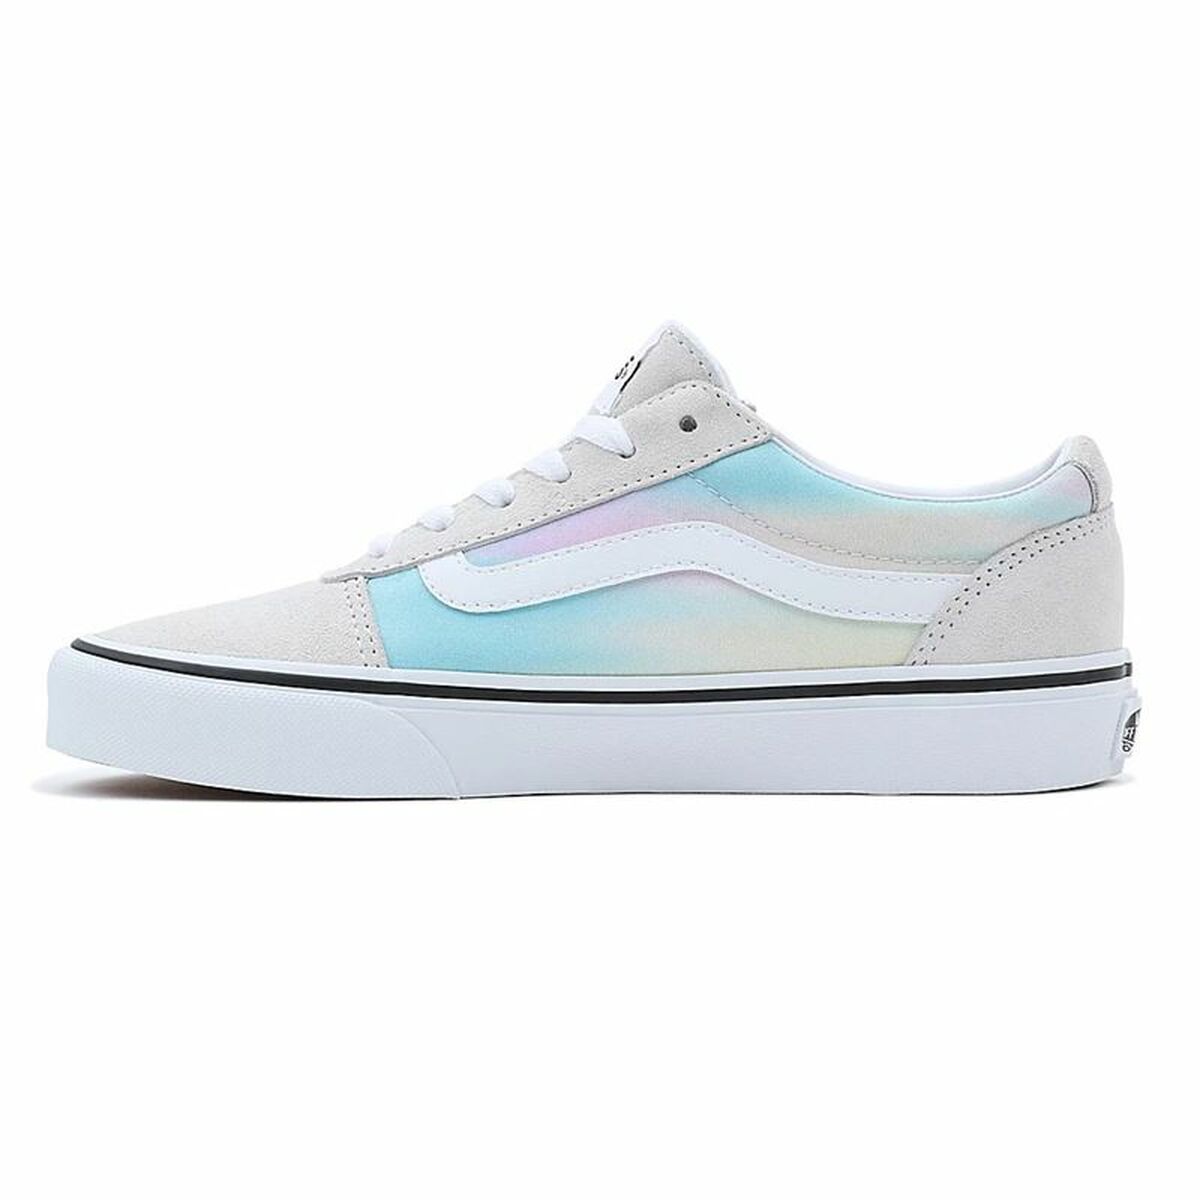 Women’s Casual Trainers Vans Ward White